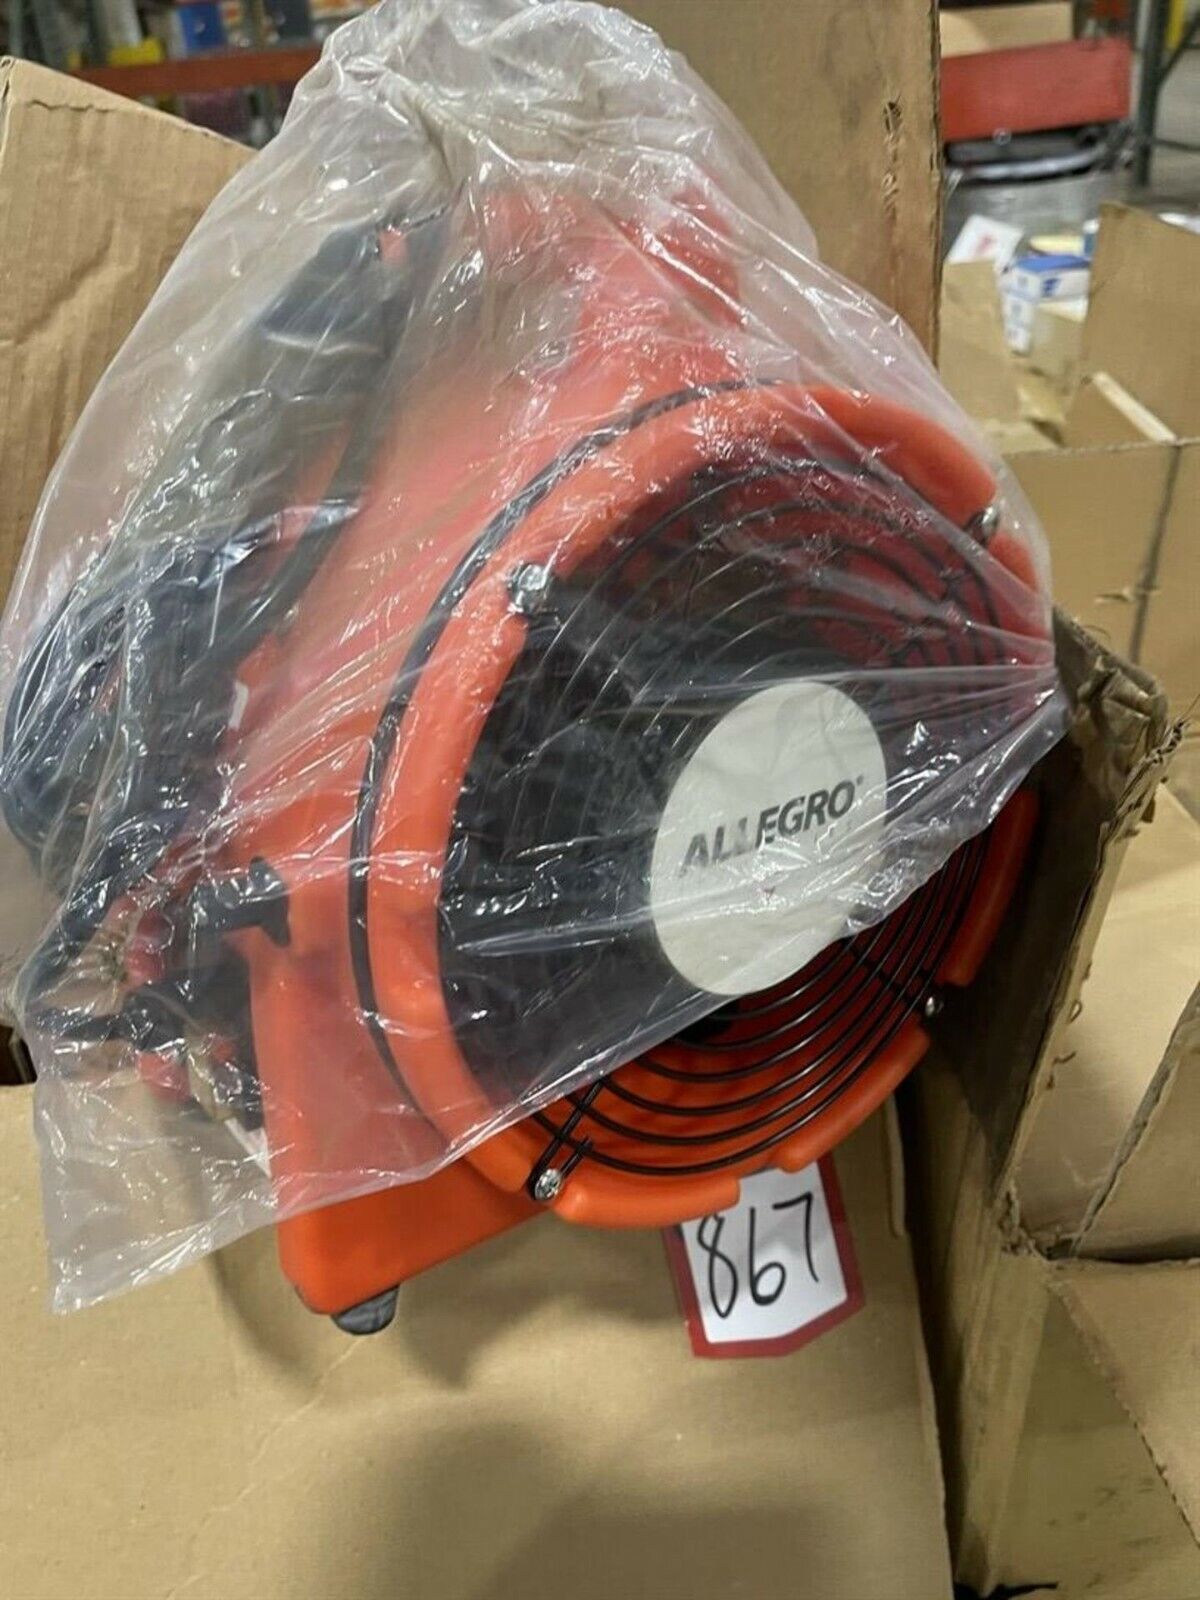 New ALEGRO 9533 CONFINED SPACE BLOWER W/ Air Supplied Shield HELMET